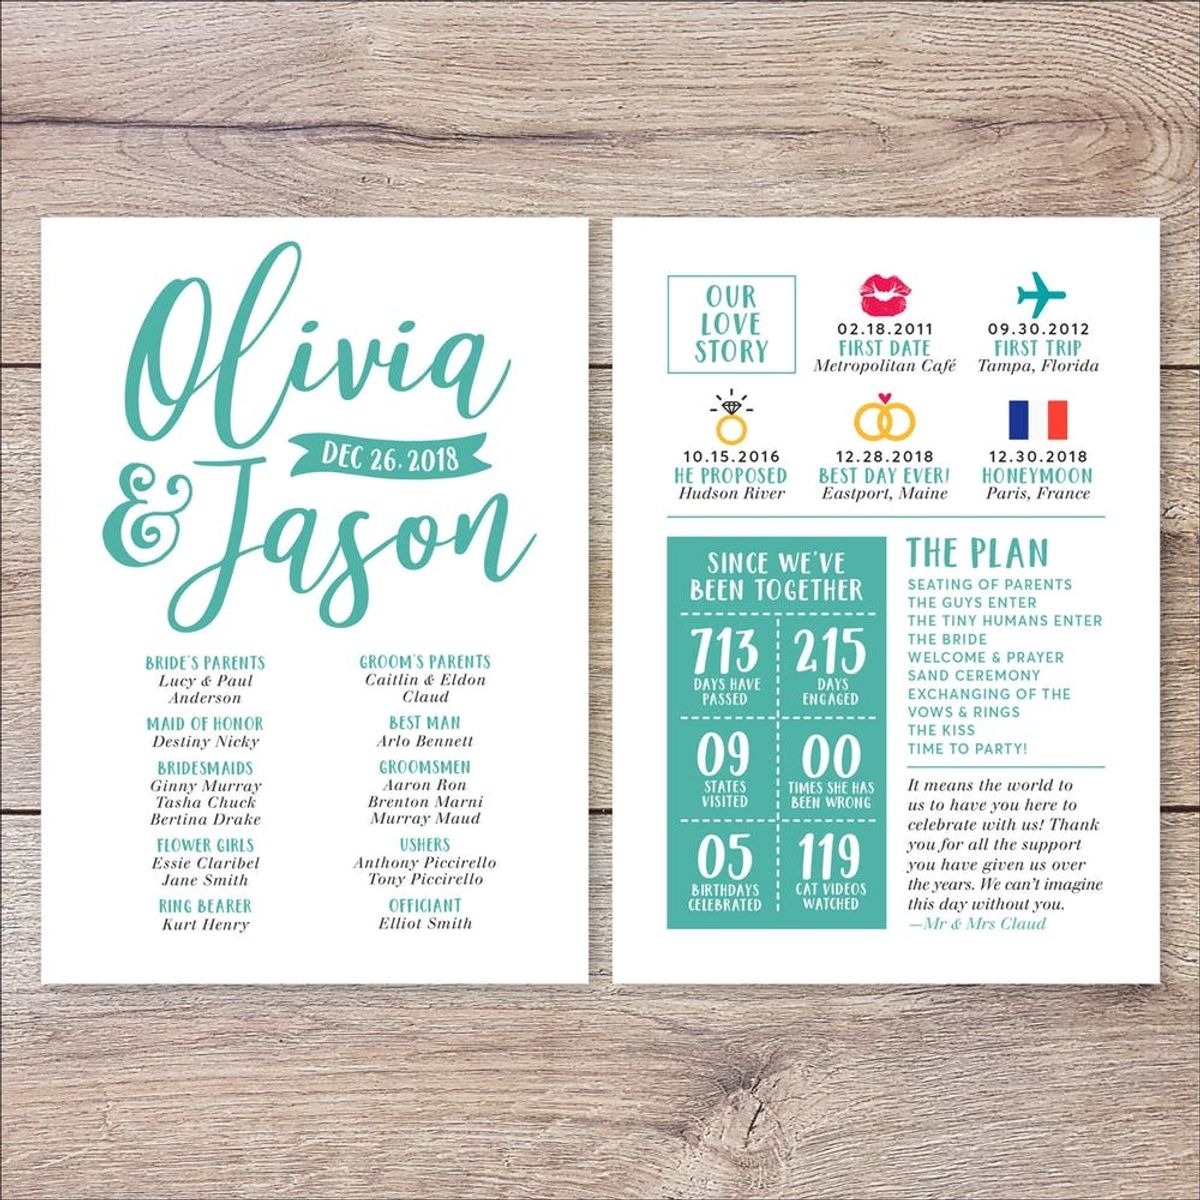 11 Non-Traditional Wedding Programs You Can Find on Etsy